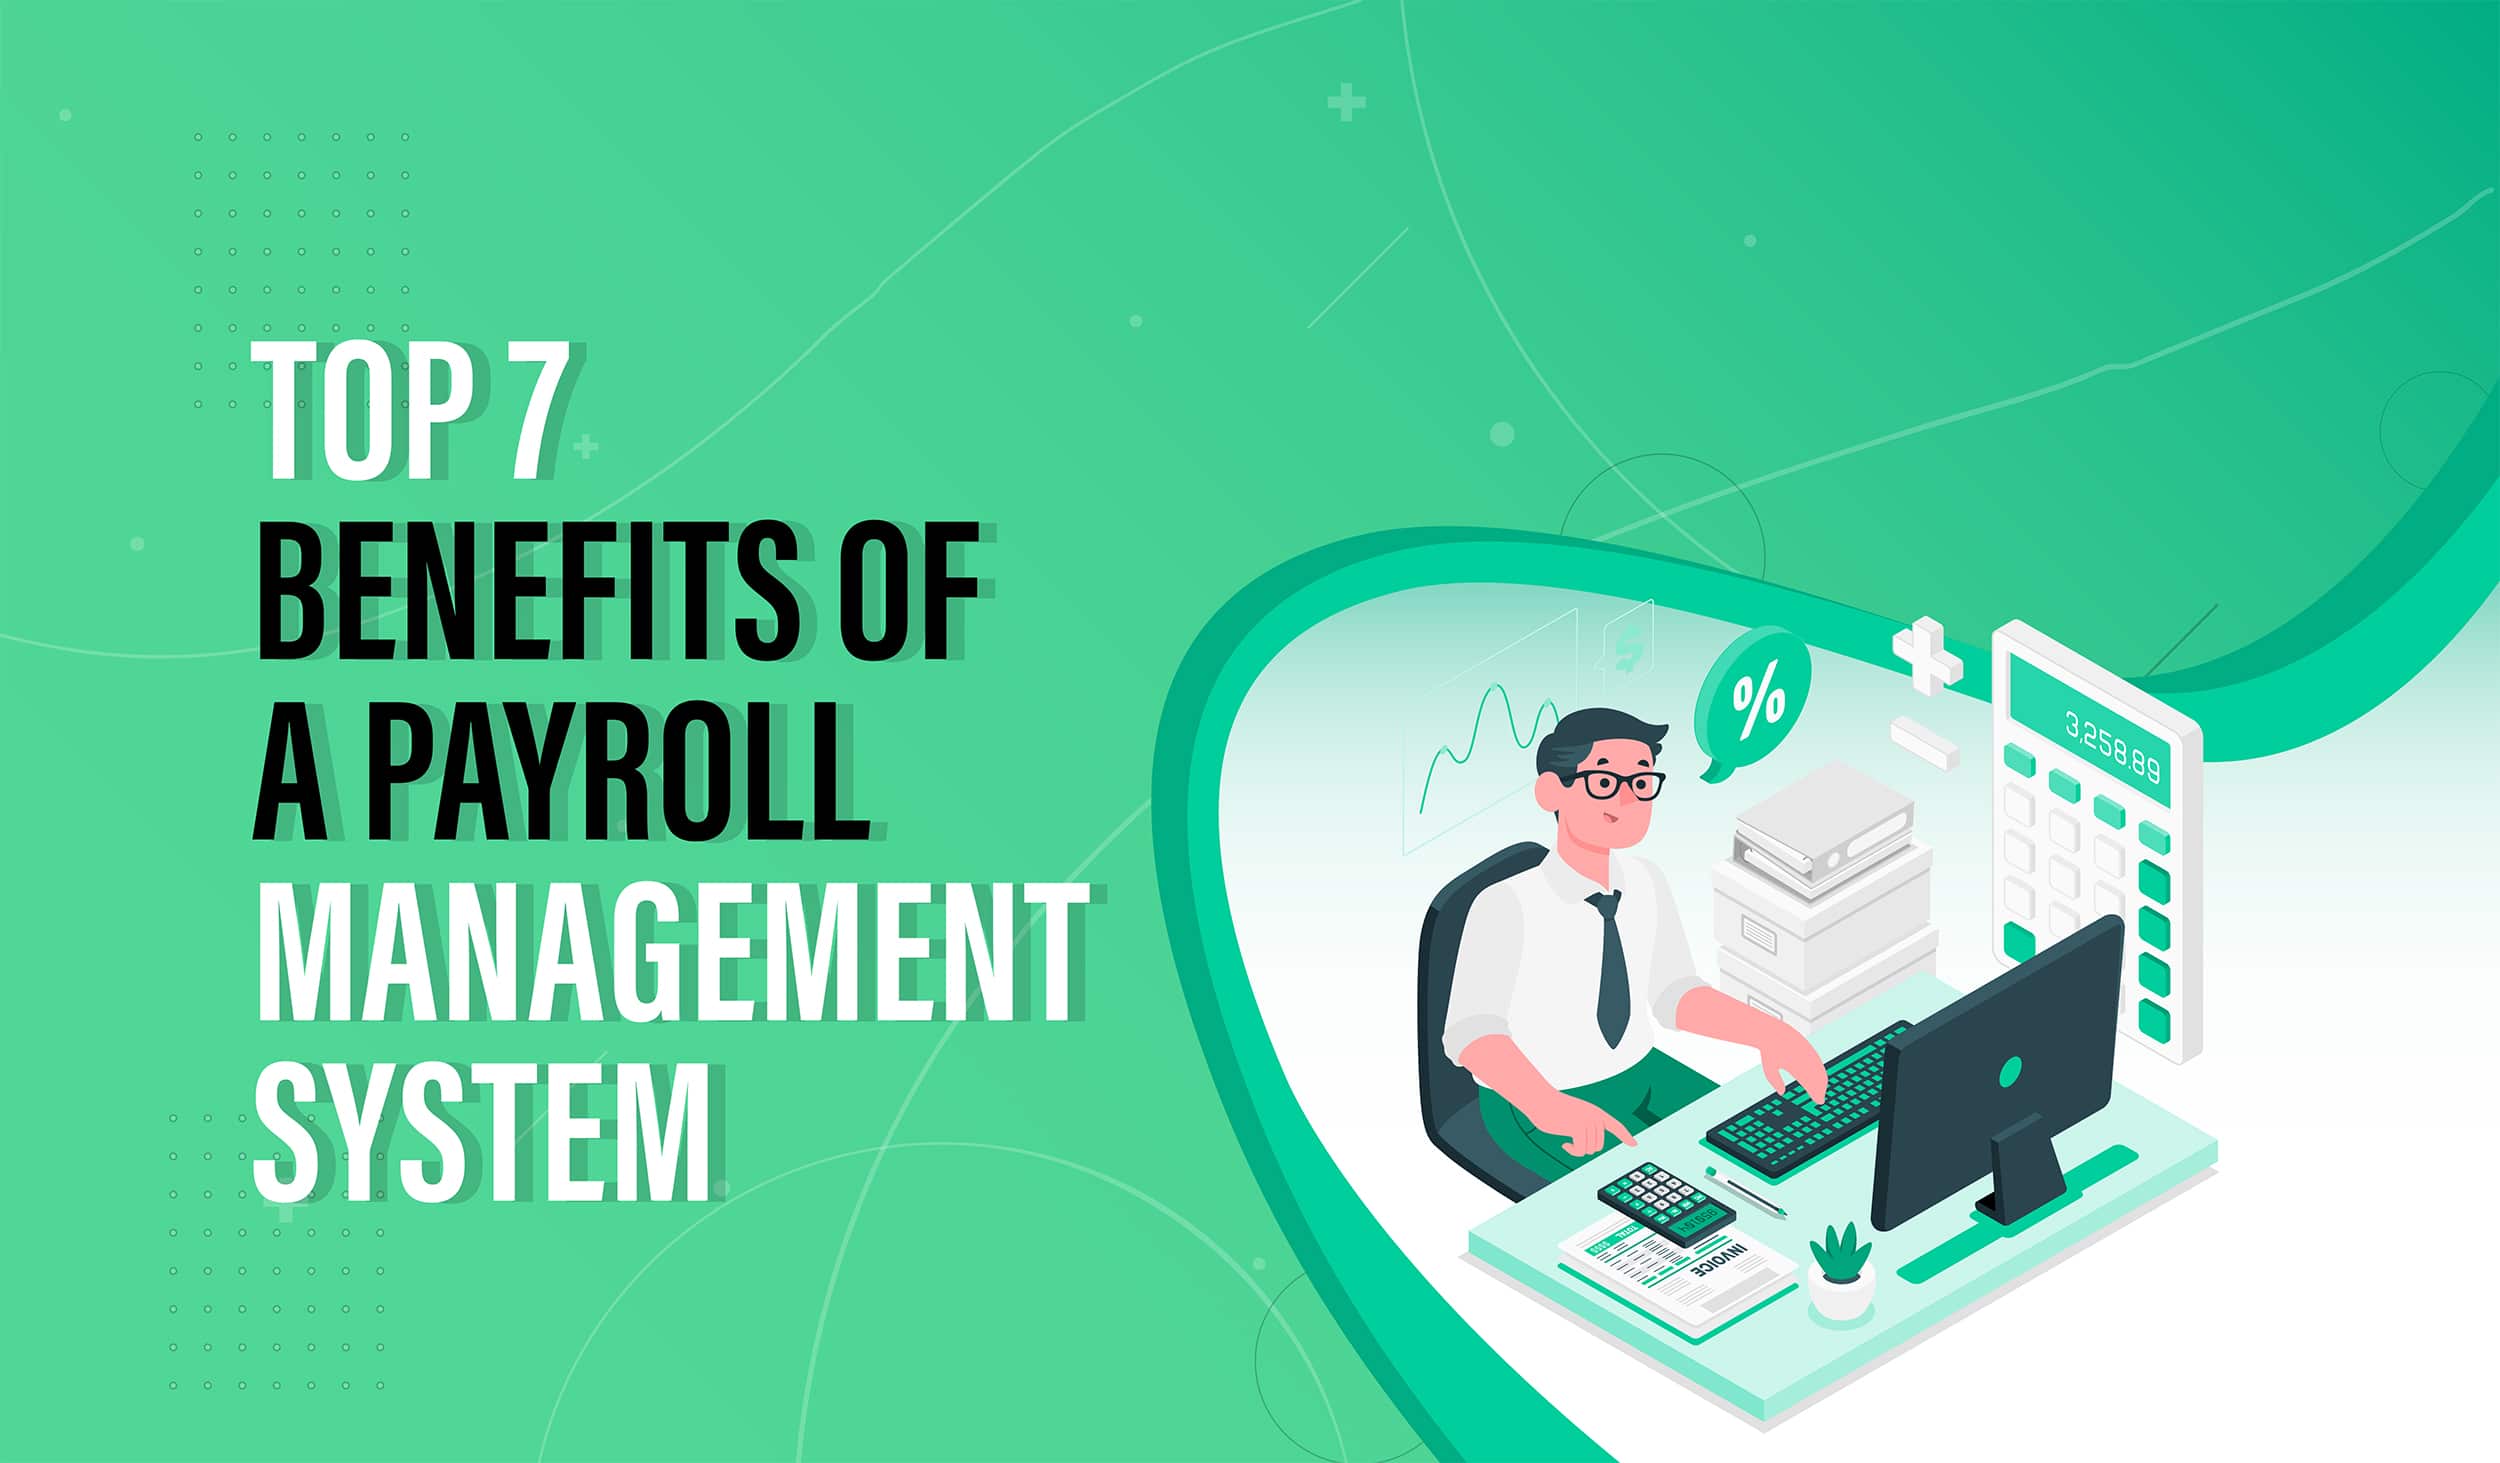 Top 7 Benefits Of A Payroll Management System 7 1